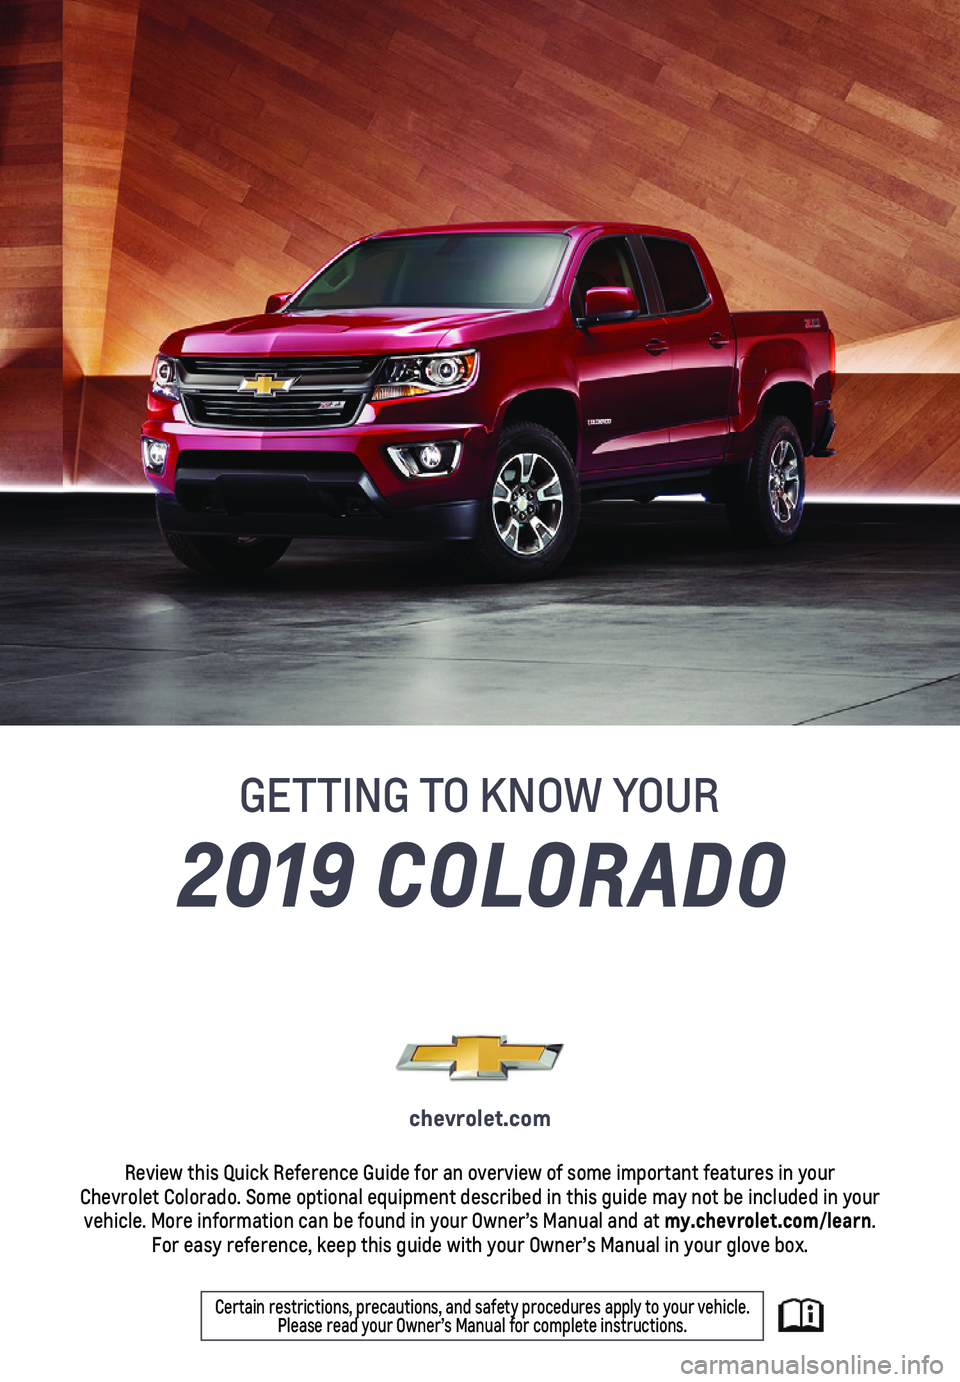 CHEVROLET COLORADO 2019  Get To Know Guide 1
2019 COLORADO
GETTING TO KNOW YOUR
chevrolet.com
Review this Quick Reference Guide for an overview of some important feat\
ures in your  Chevrolet Colorado. Some optional equipment described in this